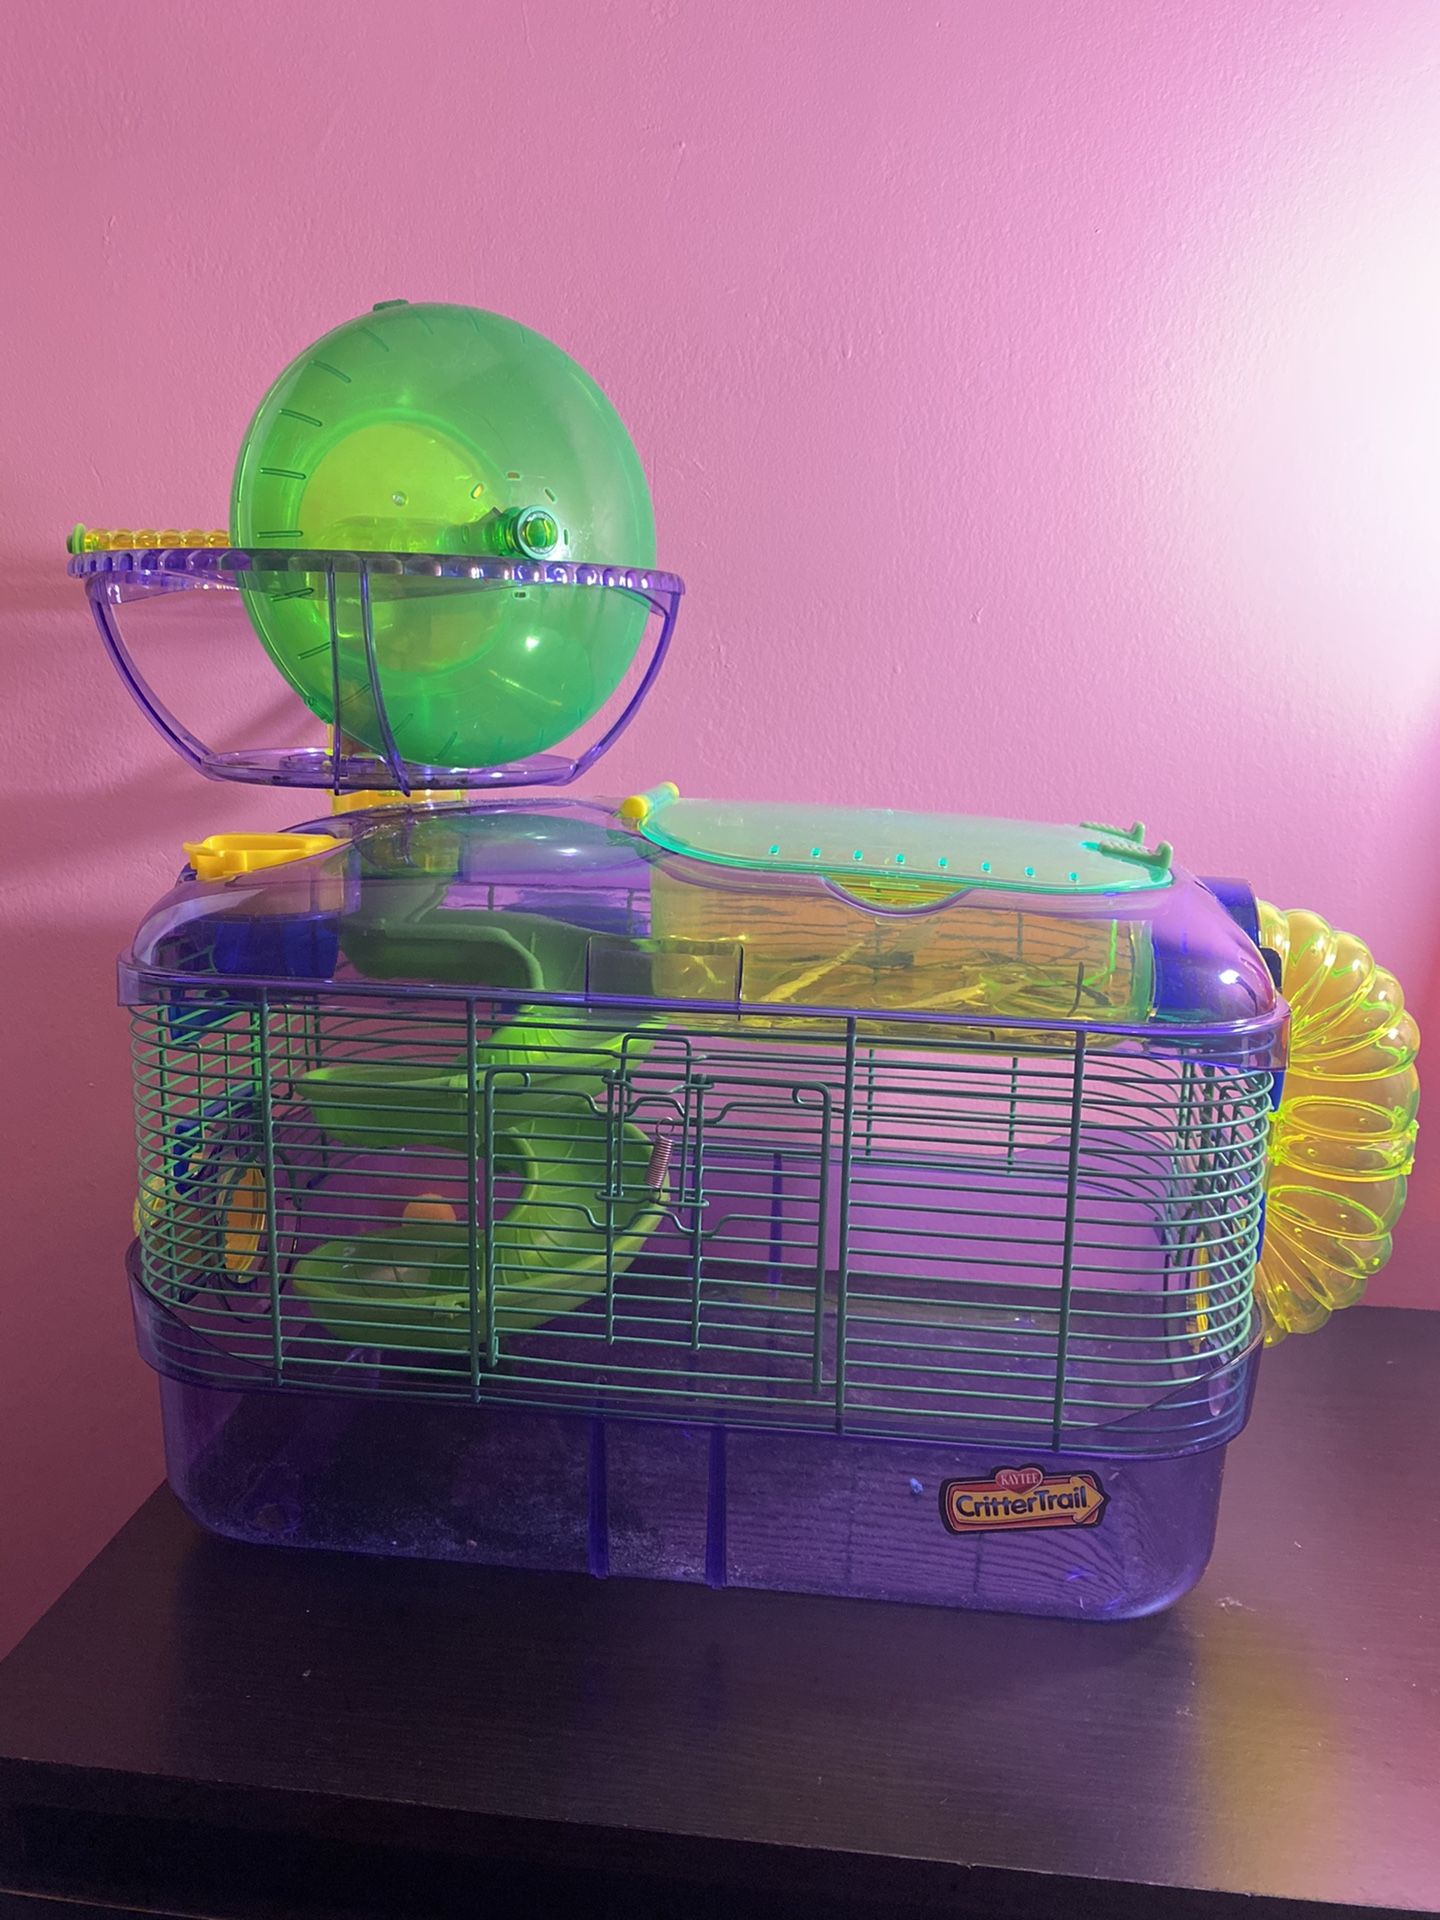 Hamster cage and supplies